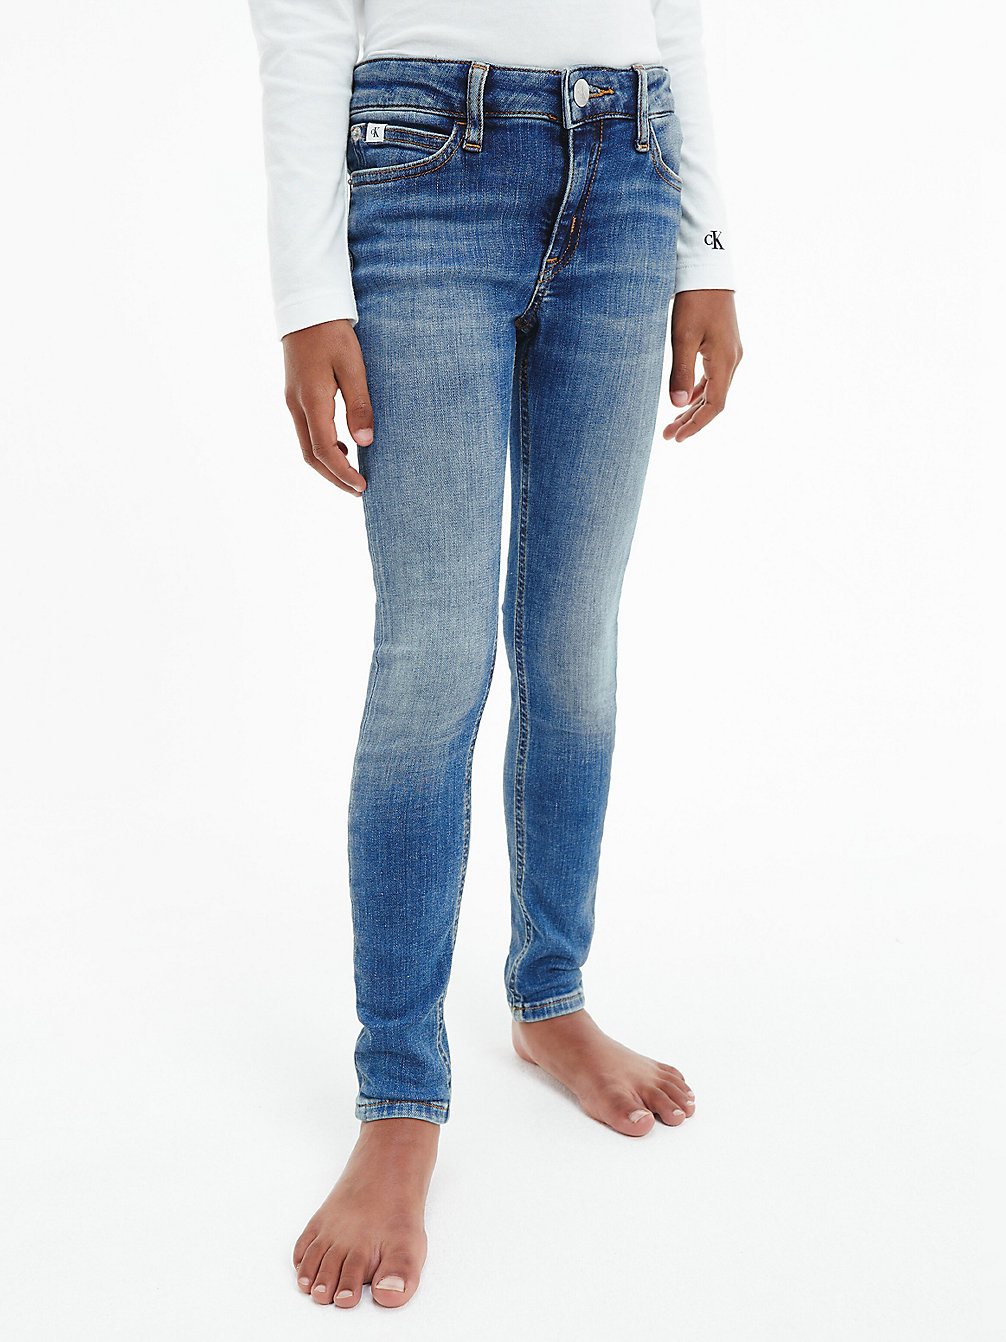 Mid Rise Skinny Jeans > ESS MID OCEAN BLUE > undefined girls > Calvin Klein